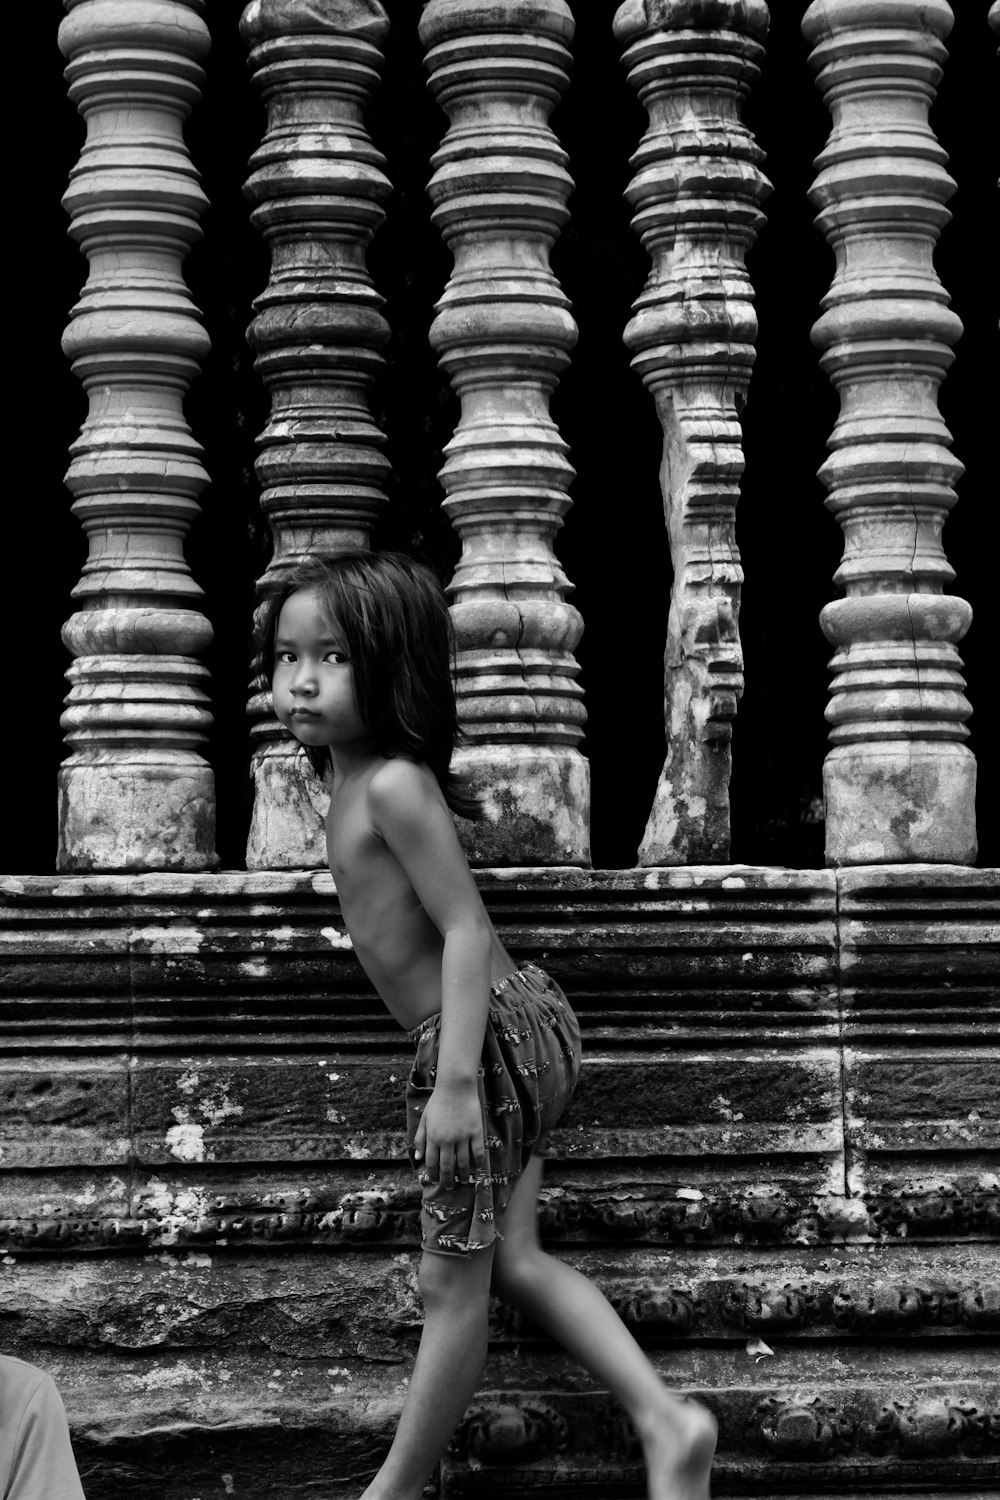 grayscale photo of topless woman sitting on concrete blocks